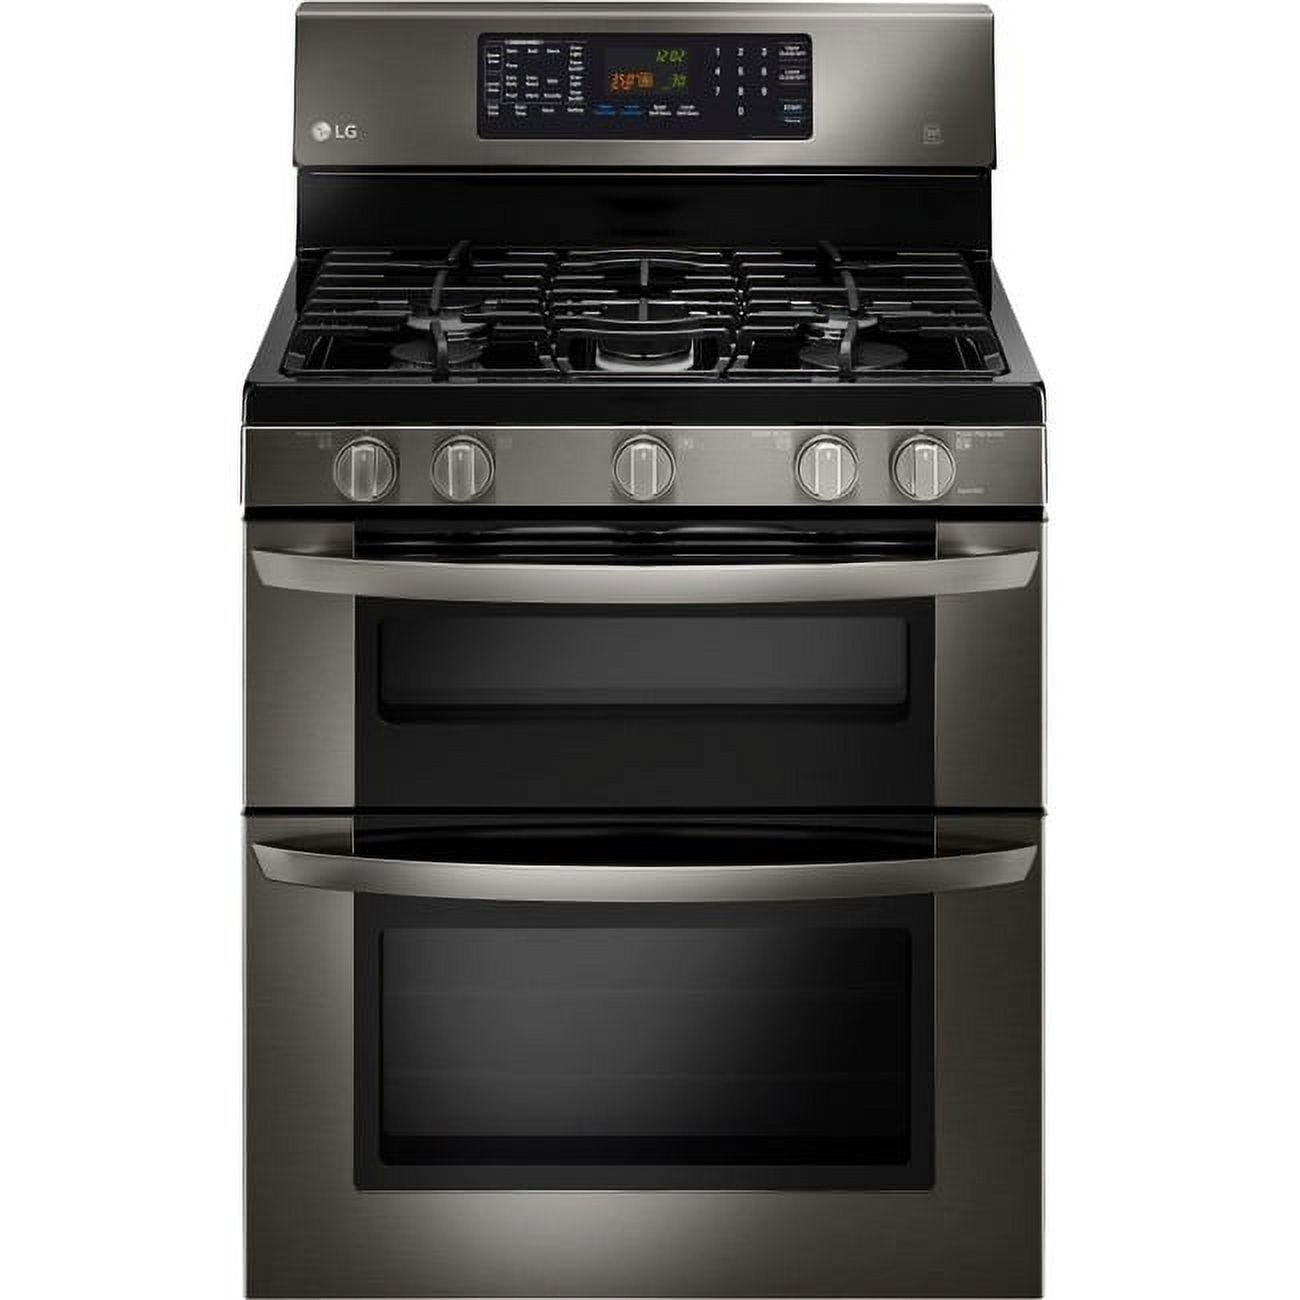 Black Stainless Steel Series 2.2 cu.ft. Over-the-Range Microwave Oven - image 3 of 4